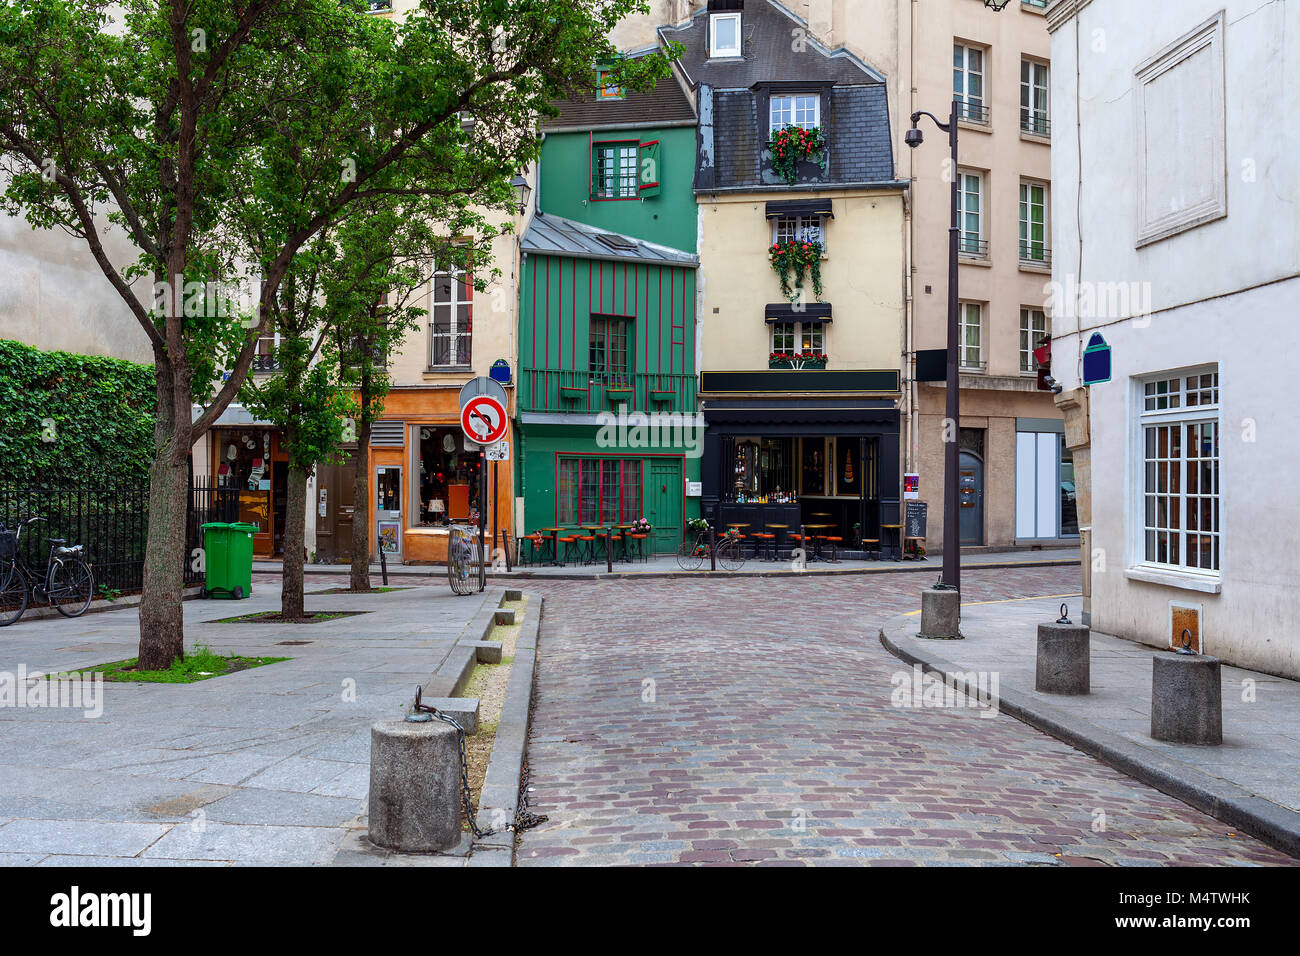 View of small cobblestone street with little bar, shops and typical architecture in Paris, France. Stock Photo